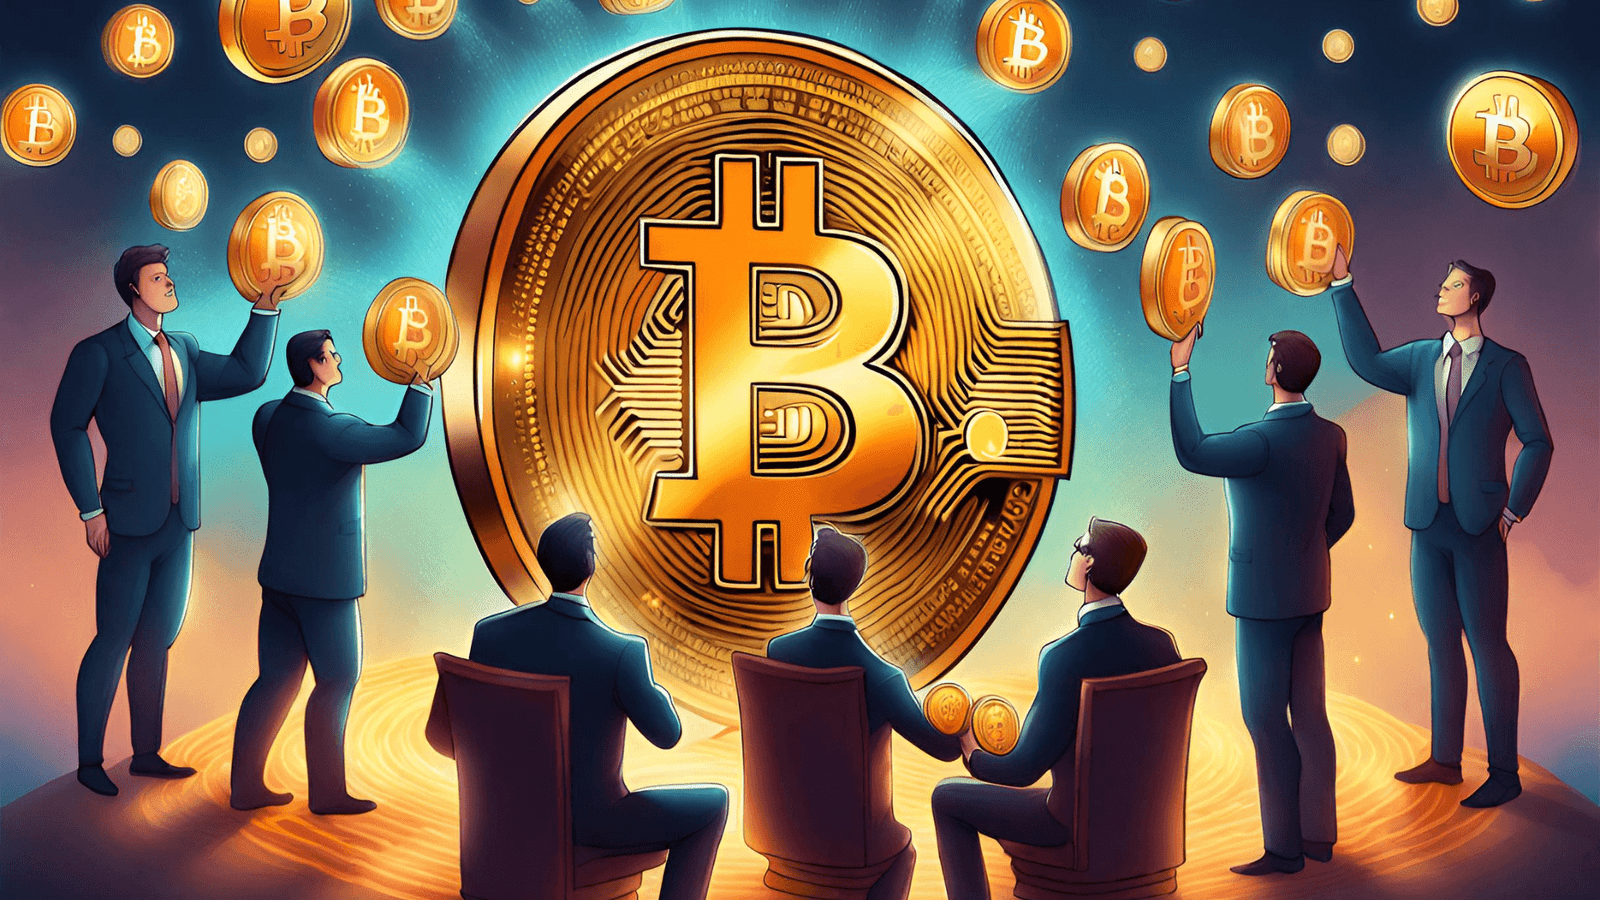 Growing Wealth through Investments in BlackRock Bitcoin ETF